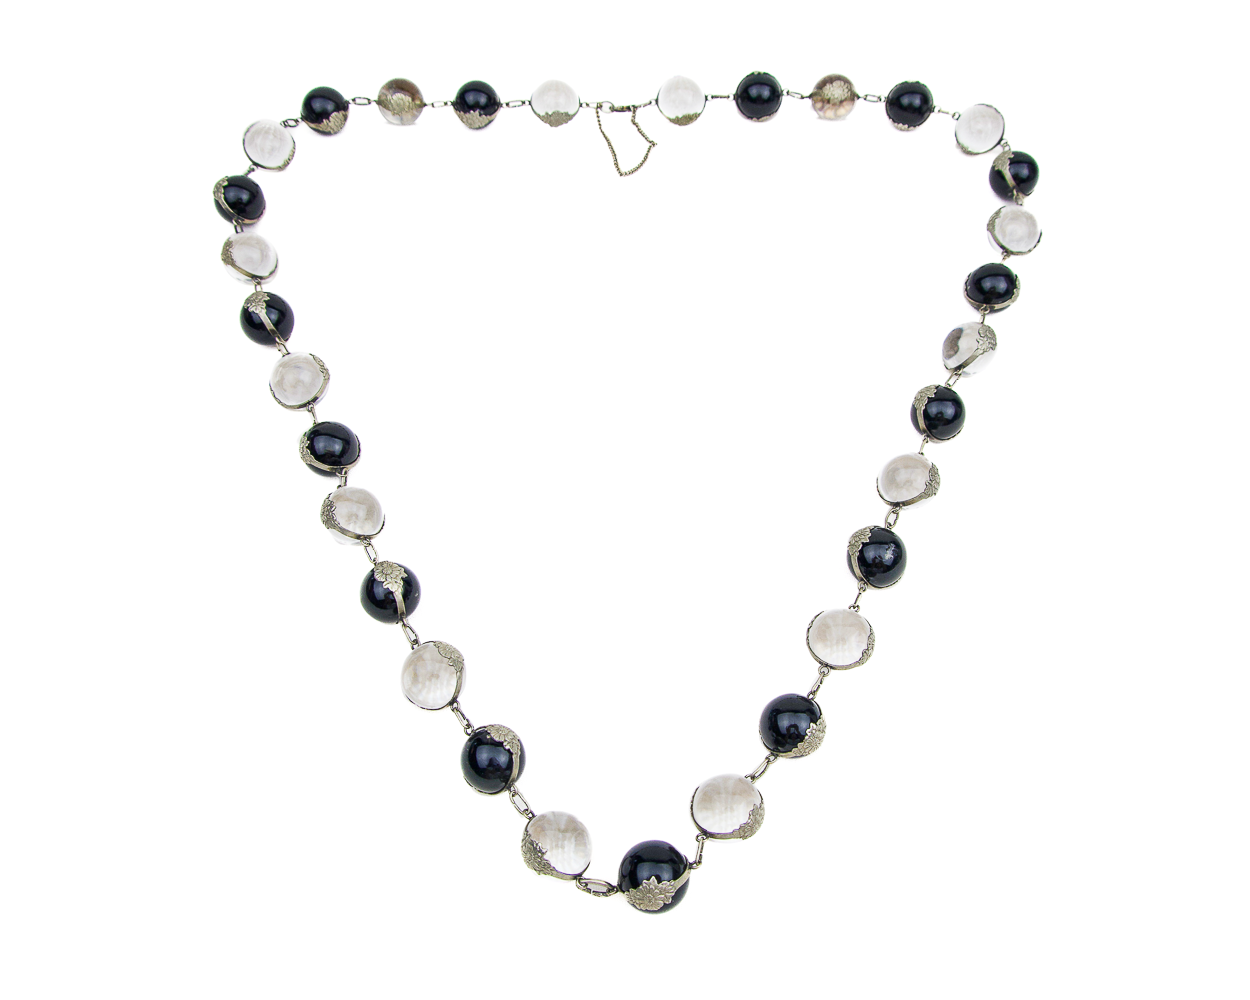 Art Deco Black and White Pools of Light Necklace